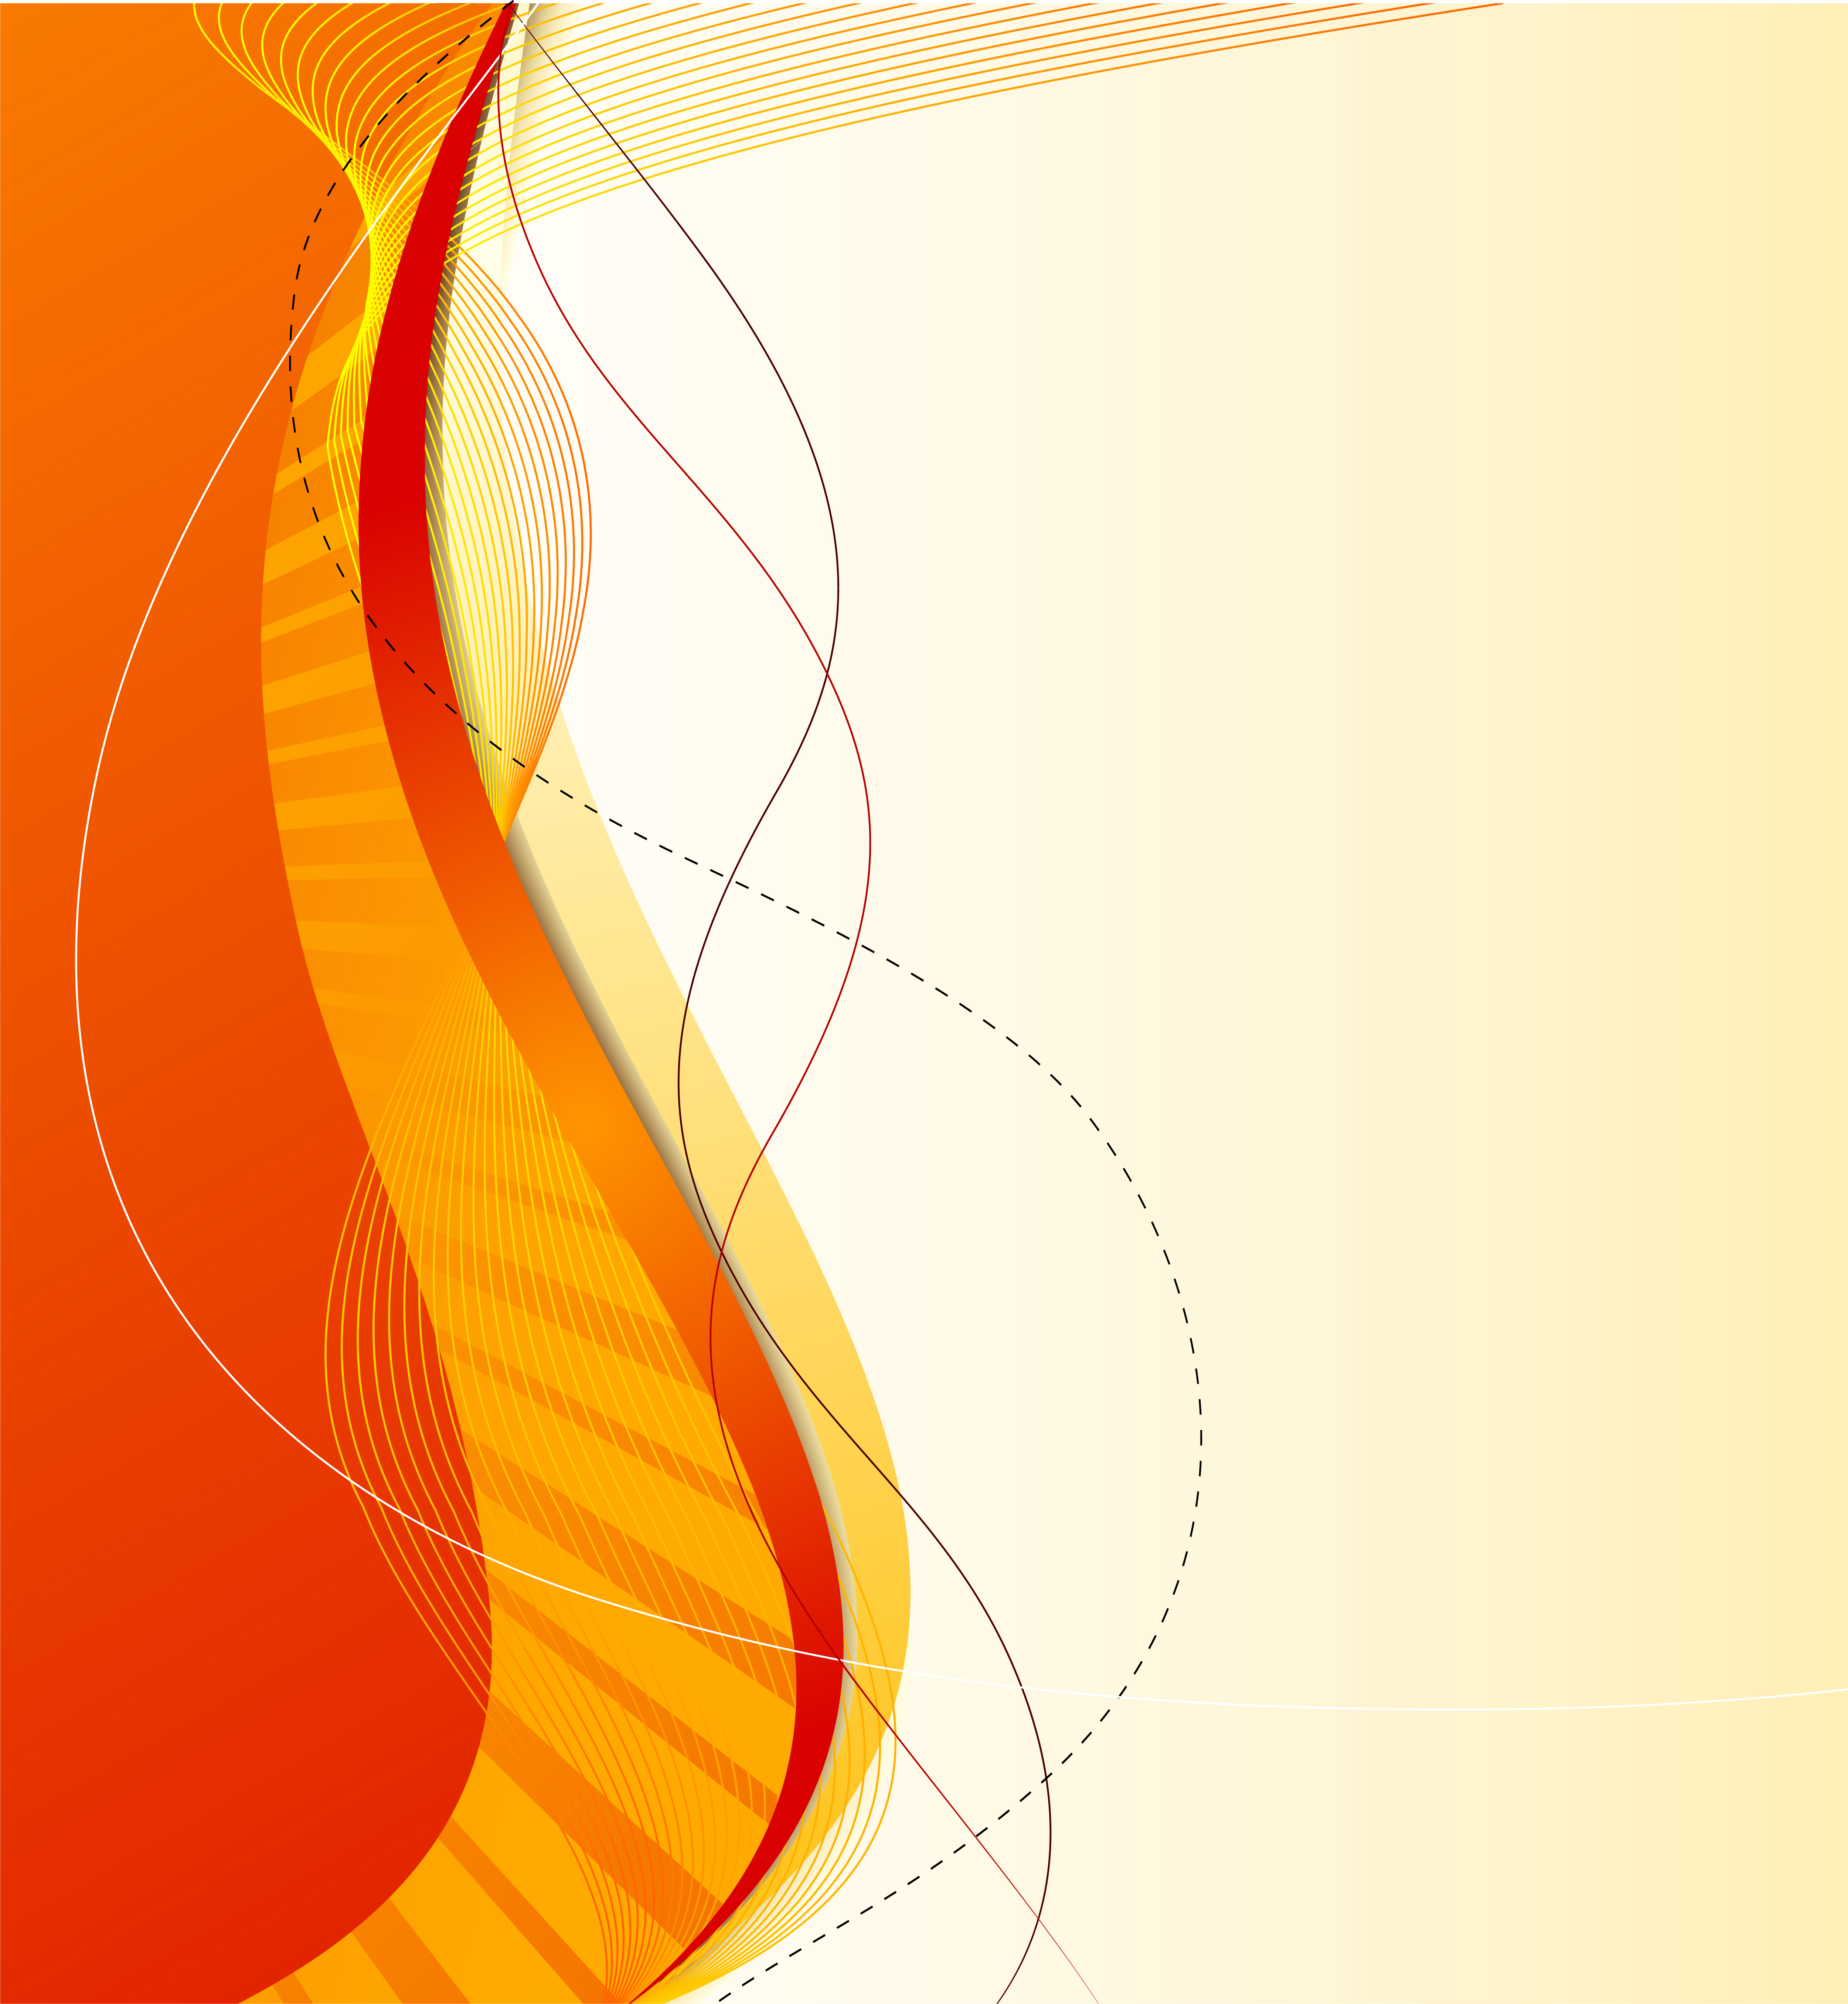 Striking Vector Vector Design: Vector Design Abstract Background With ...